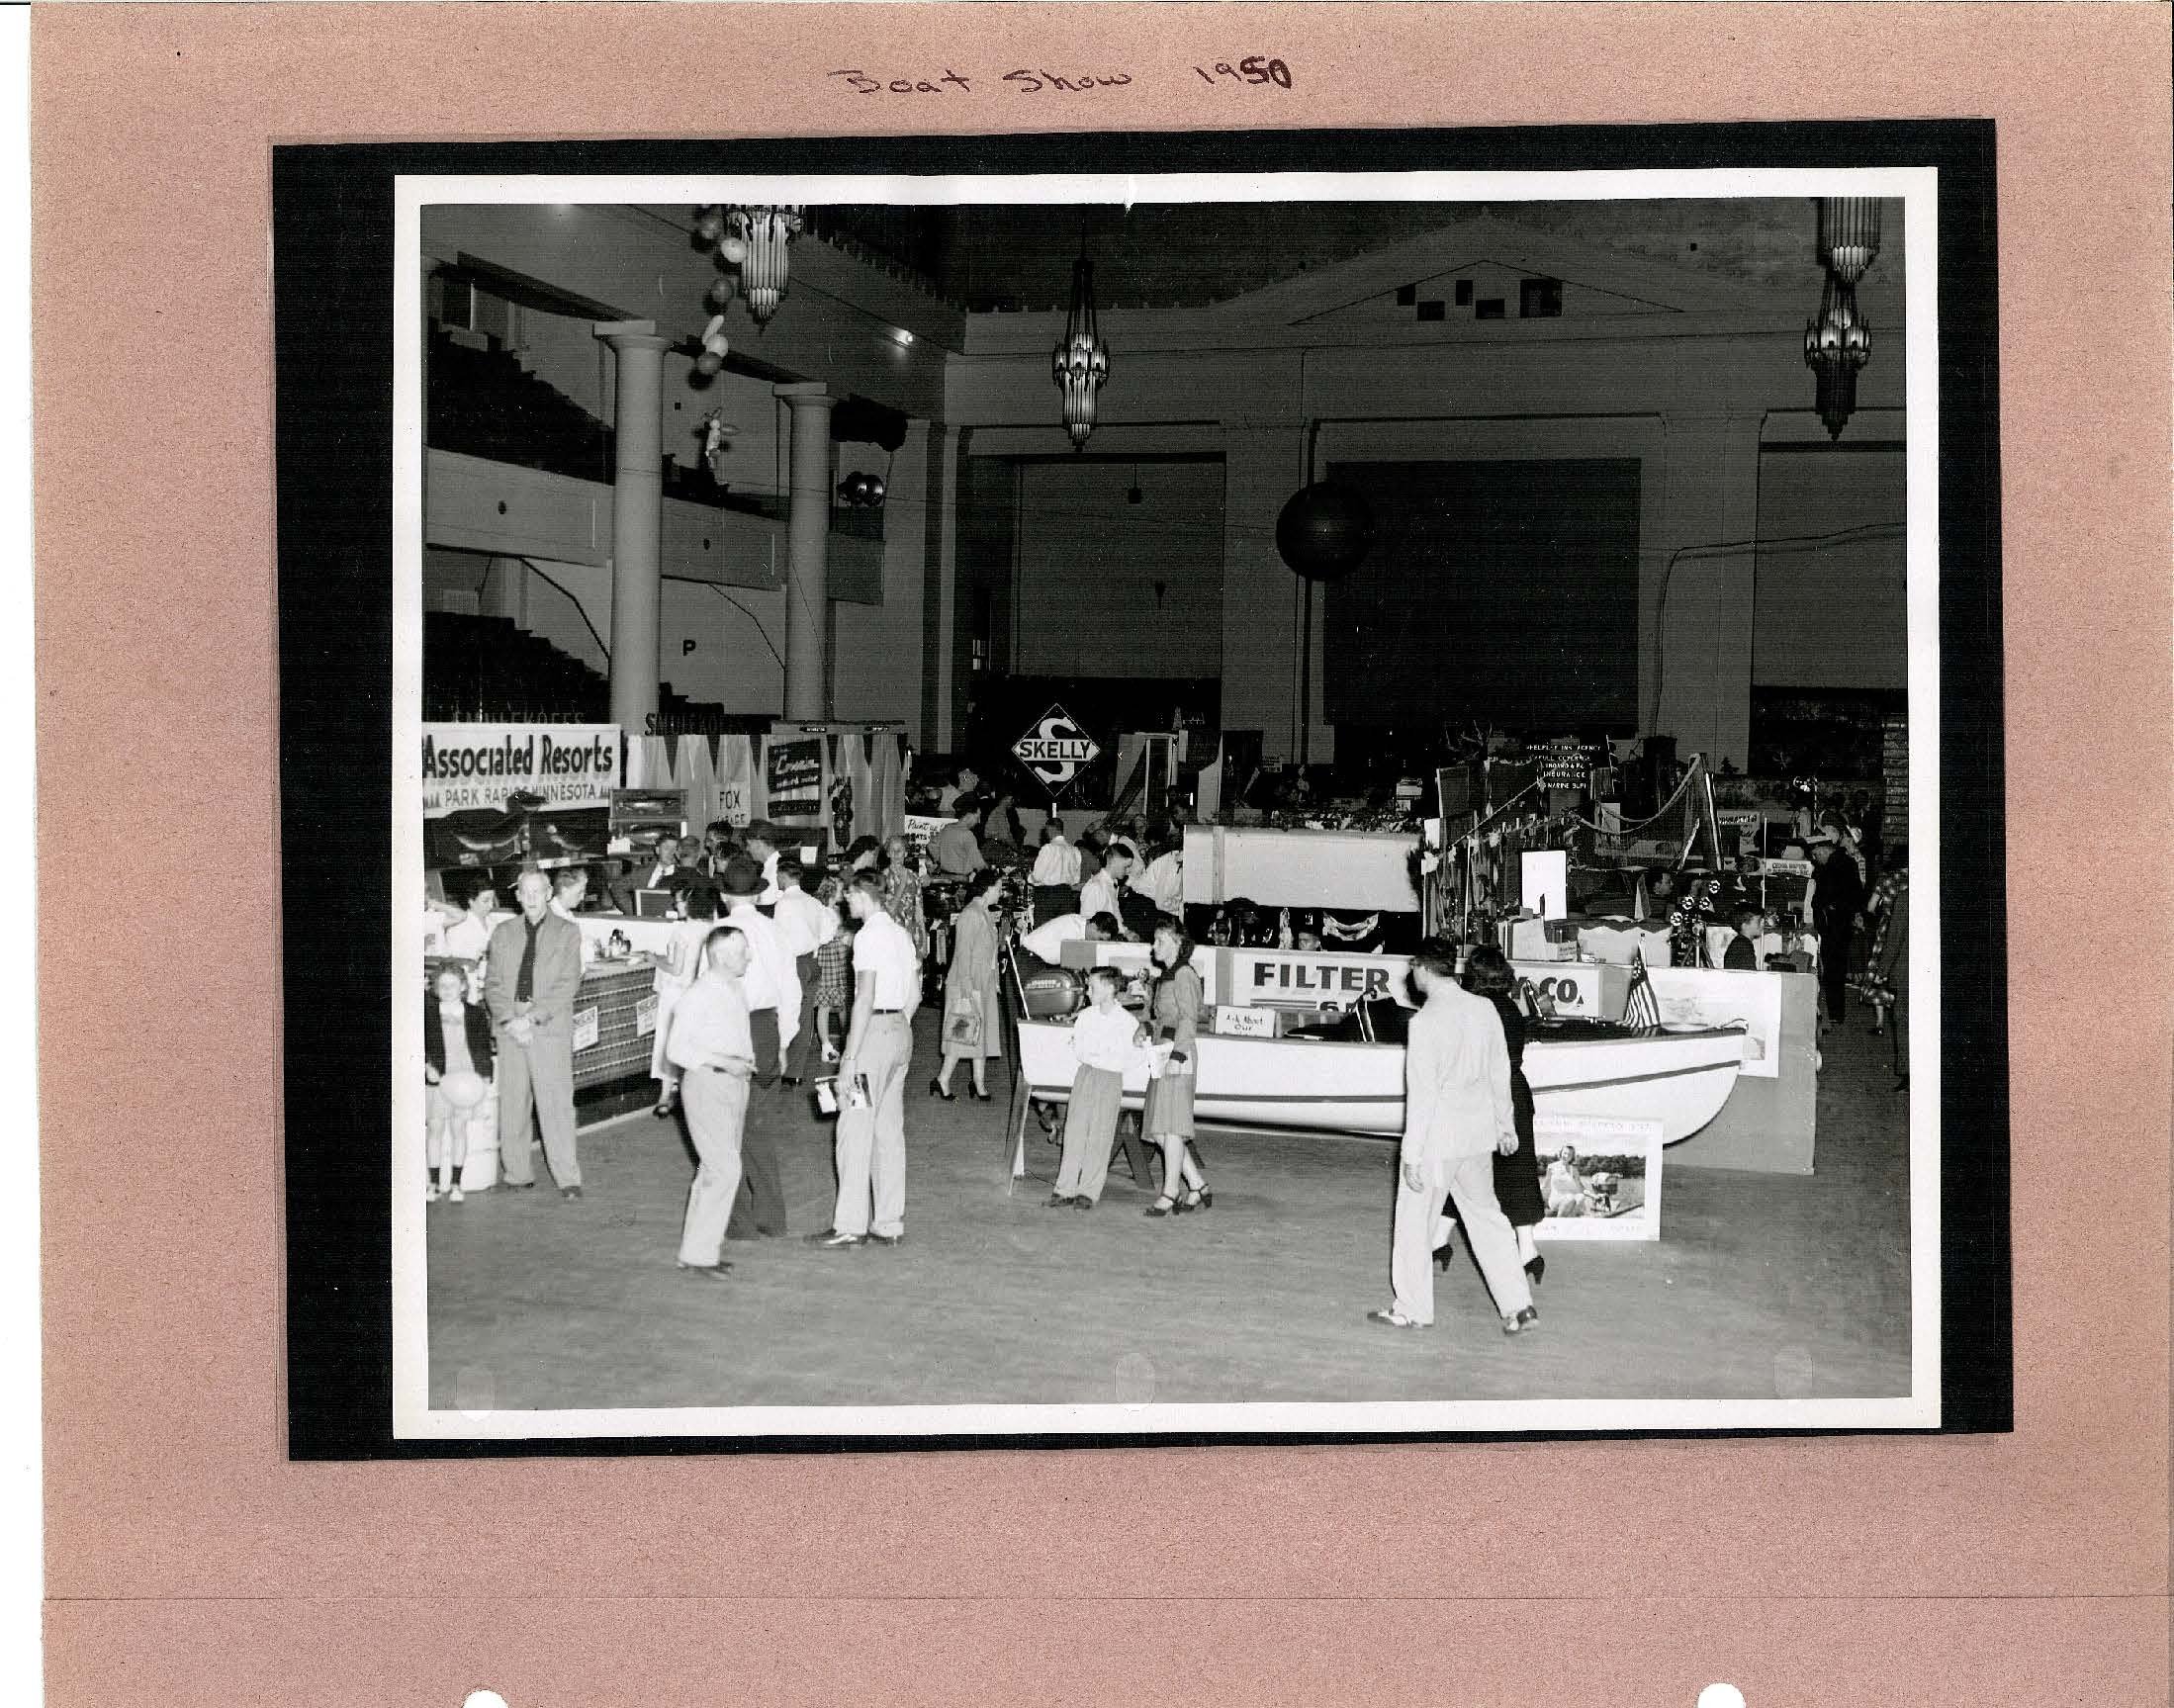 Photo taken at Boat show 1950 of people at show